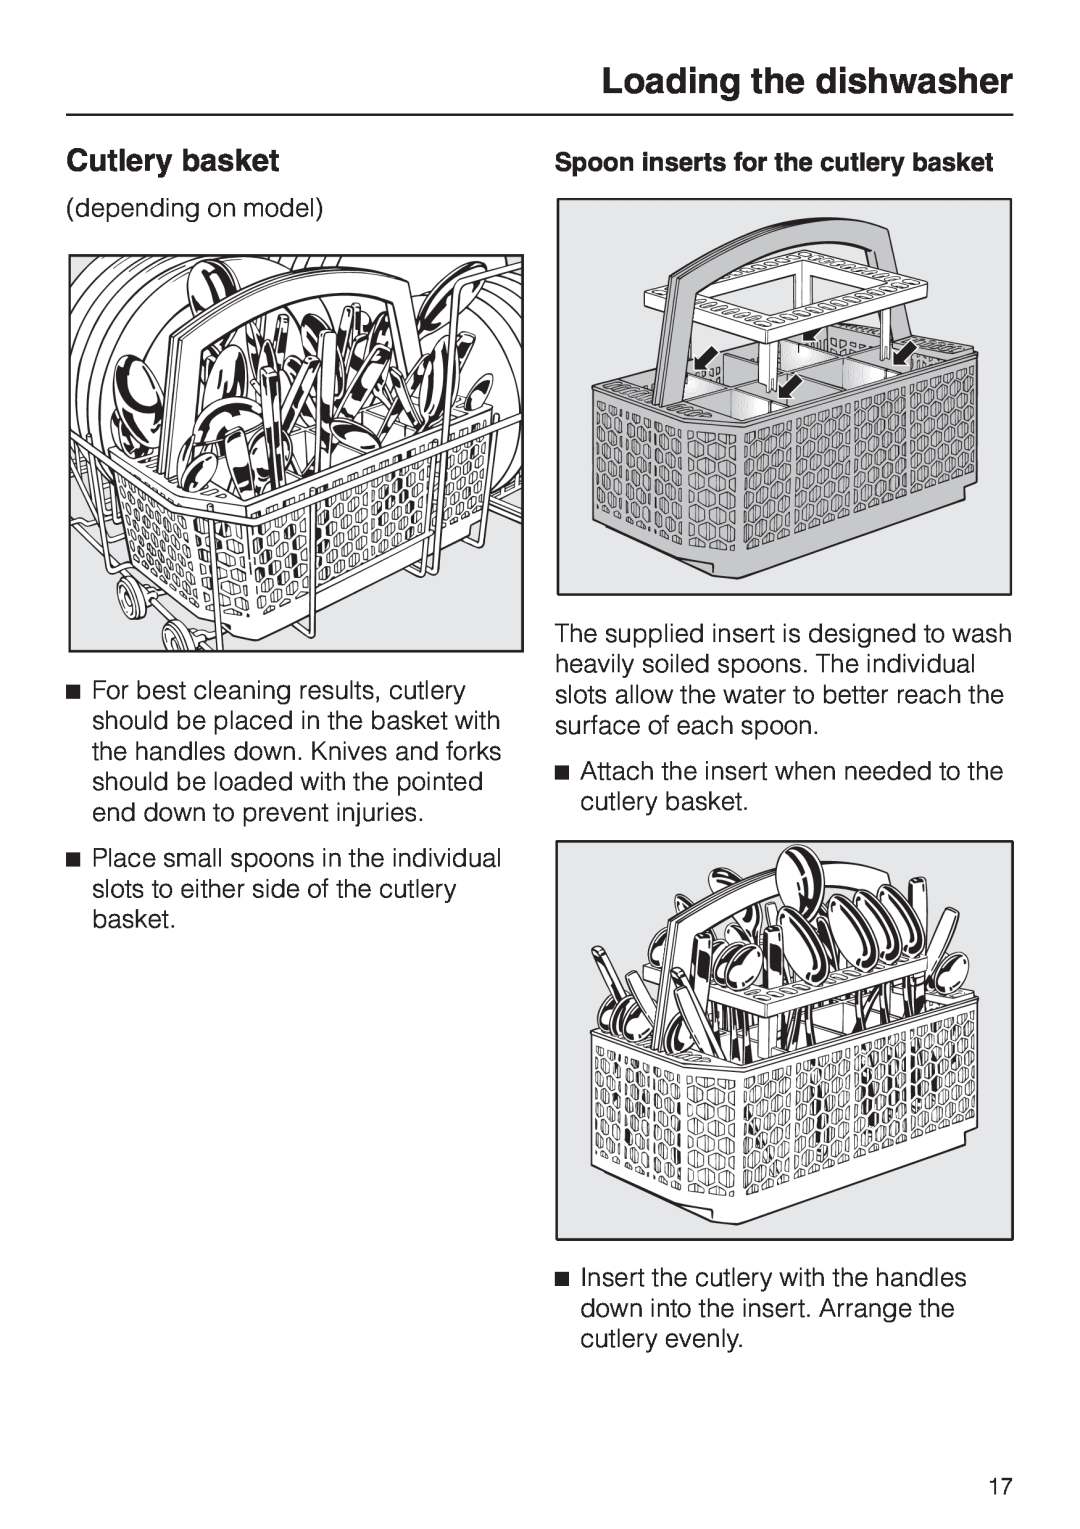 Miele G 2140 manual Cutlery basket, Loading the dishwasher, Spoon inserts for the cutlery basket 